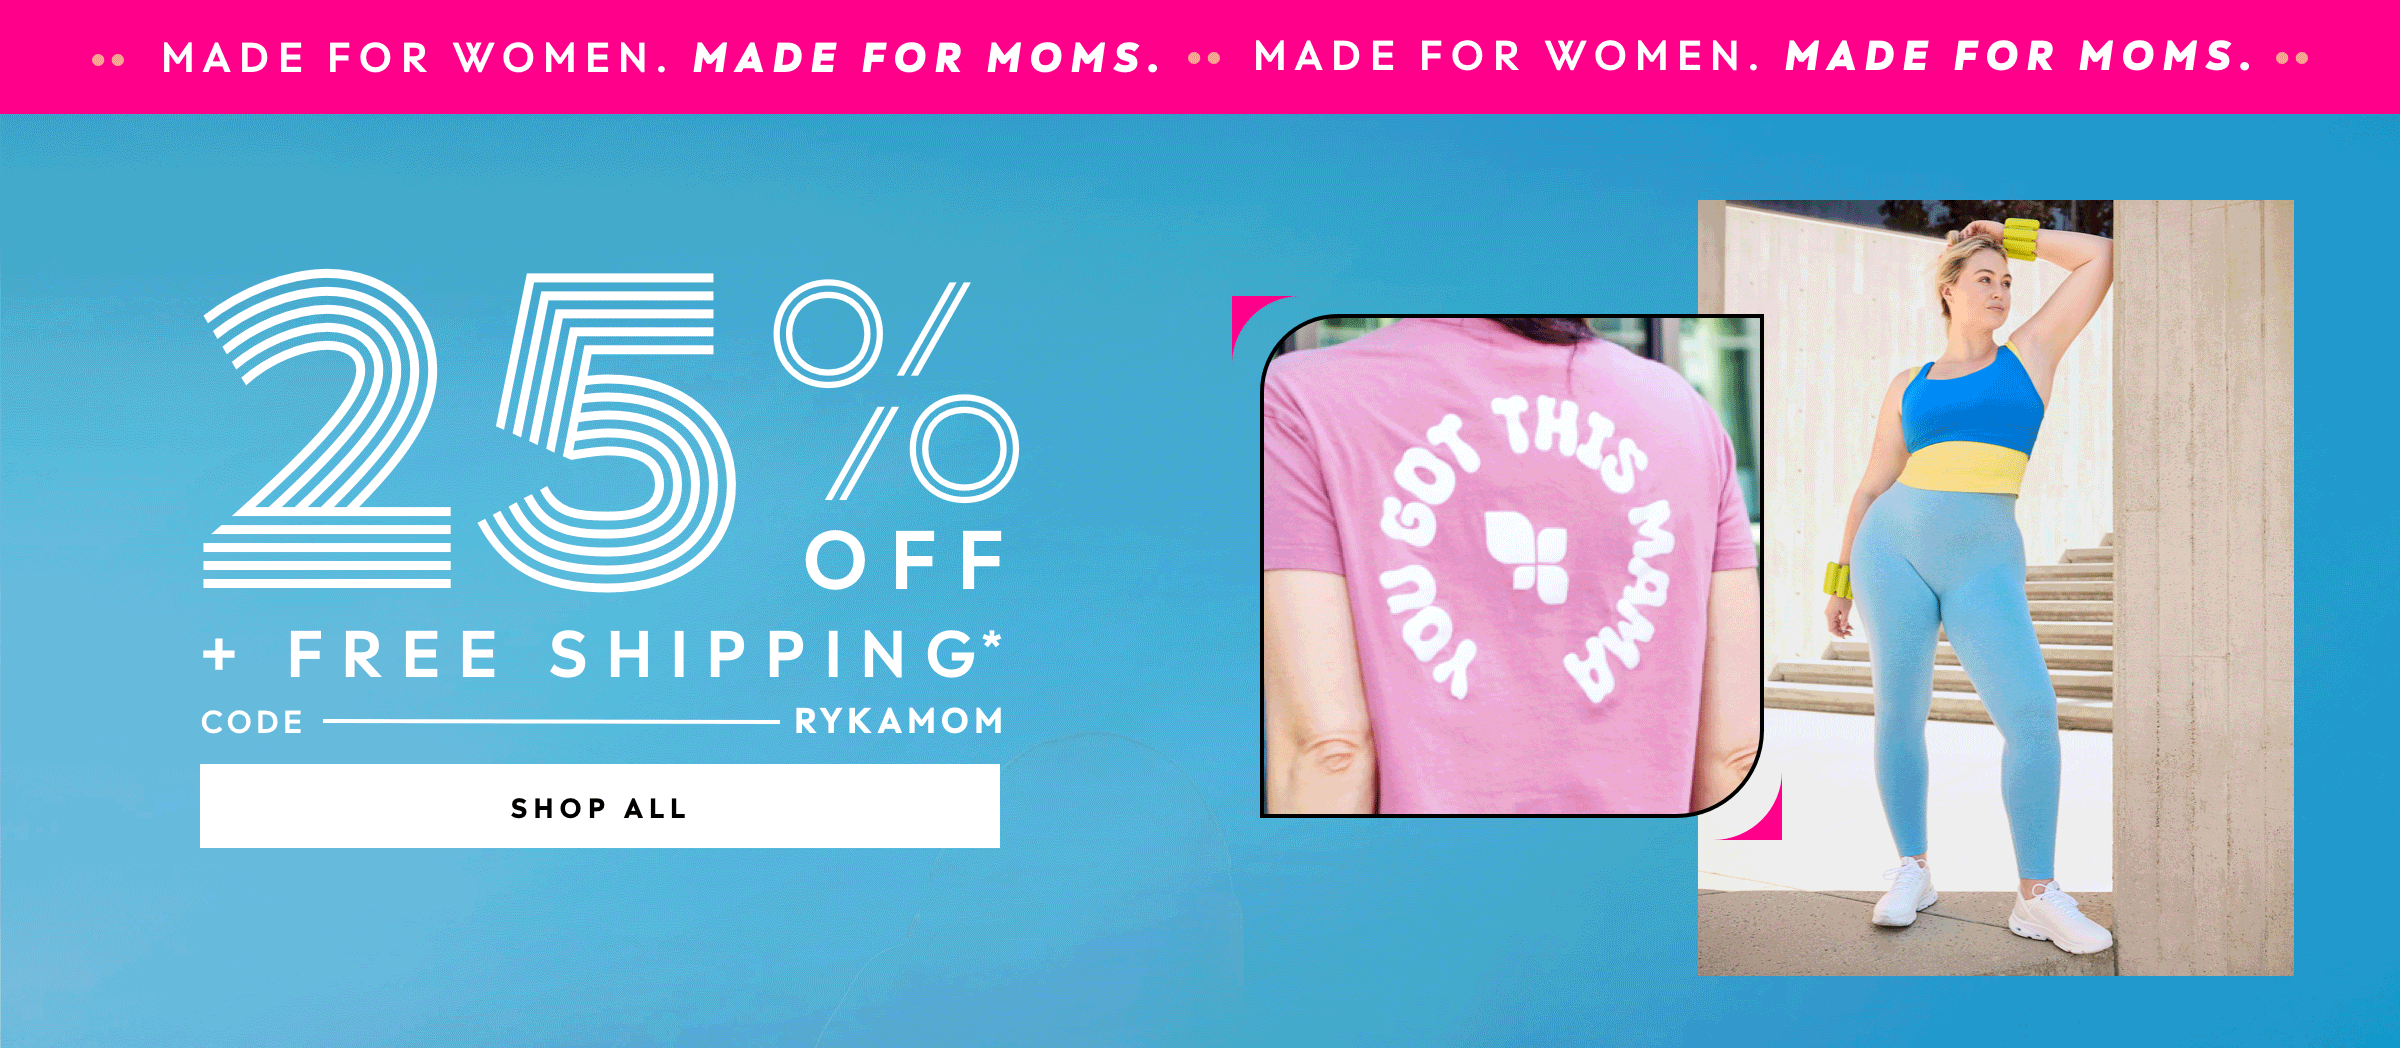 Made for women. Made for moms. 25 percent off plus free shipping with code RYKAMOM. Shop all.